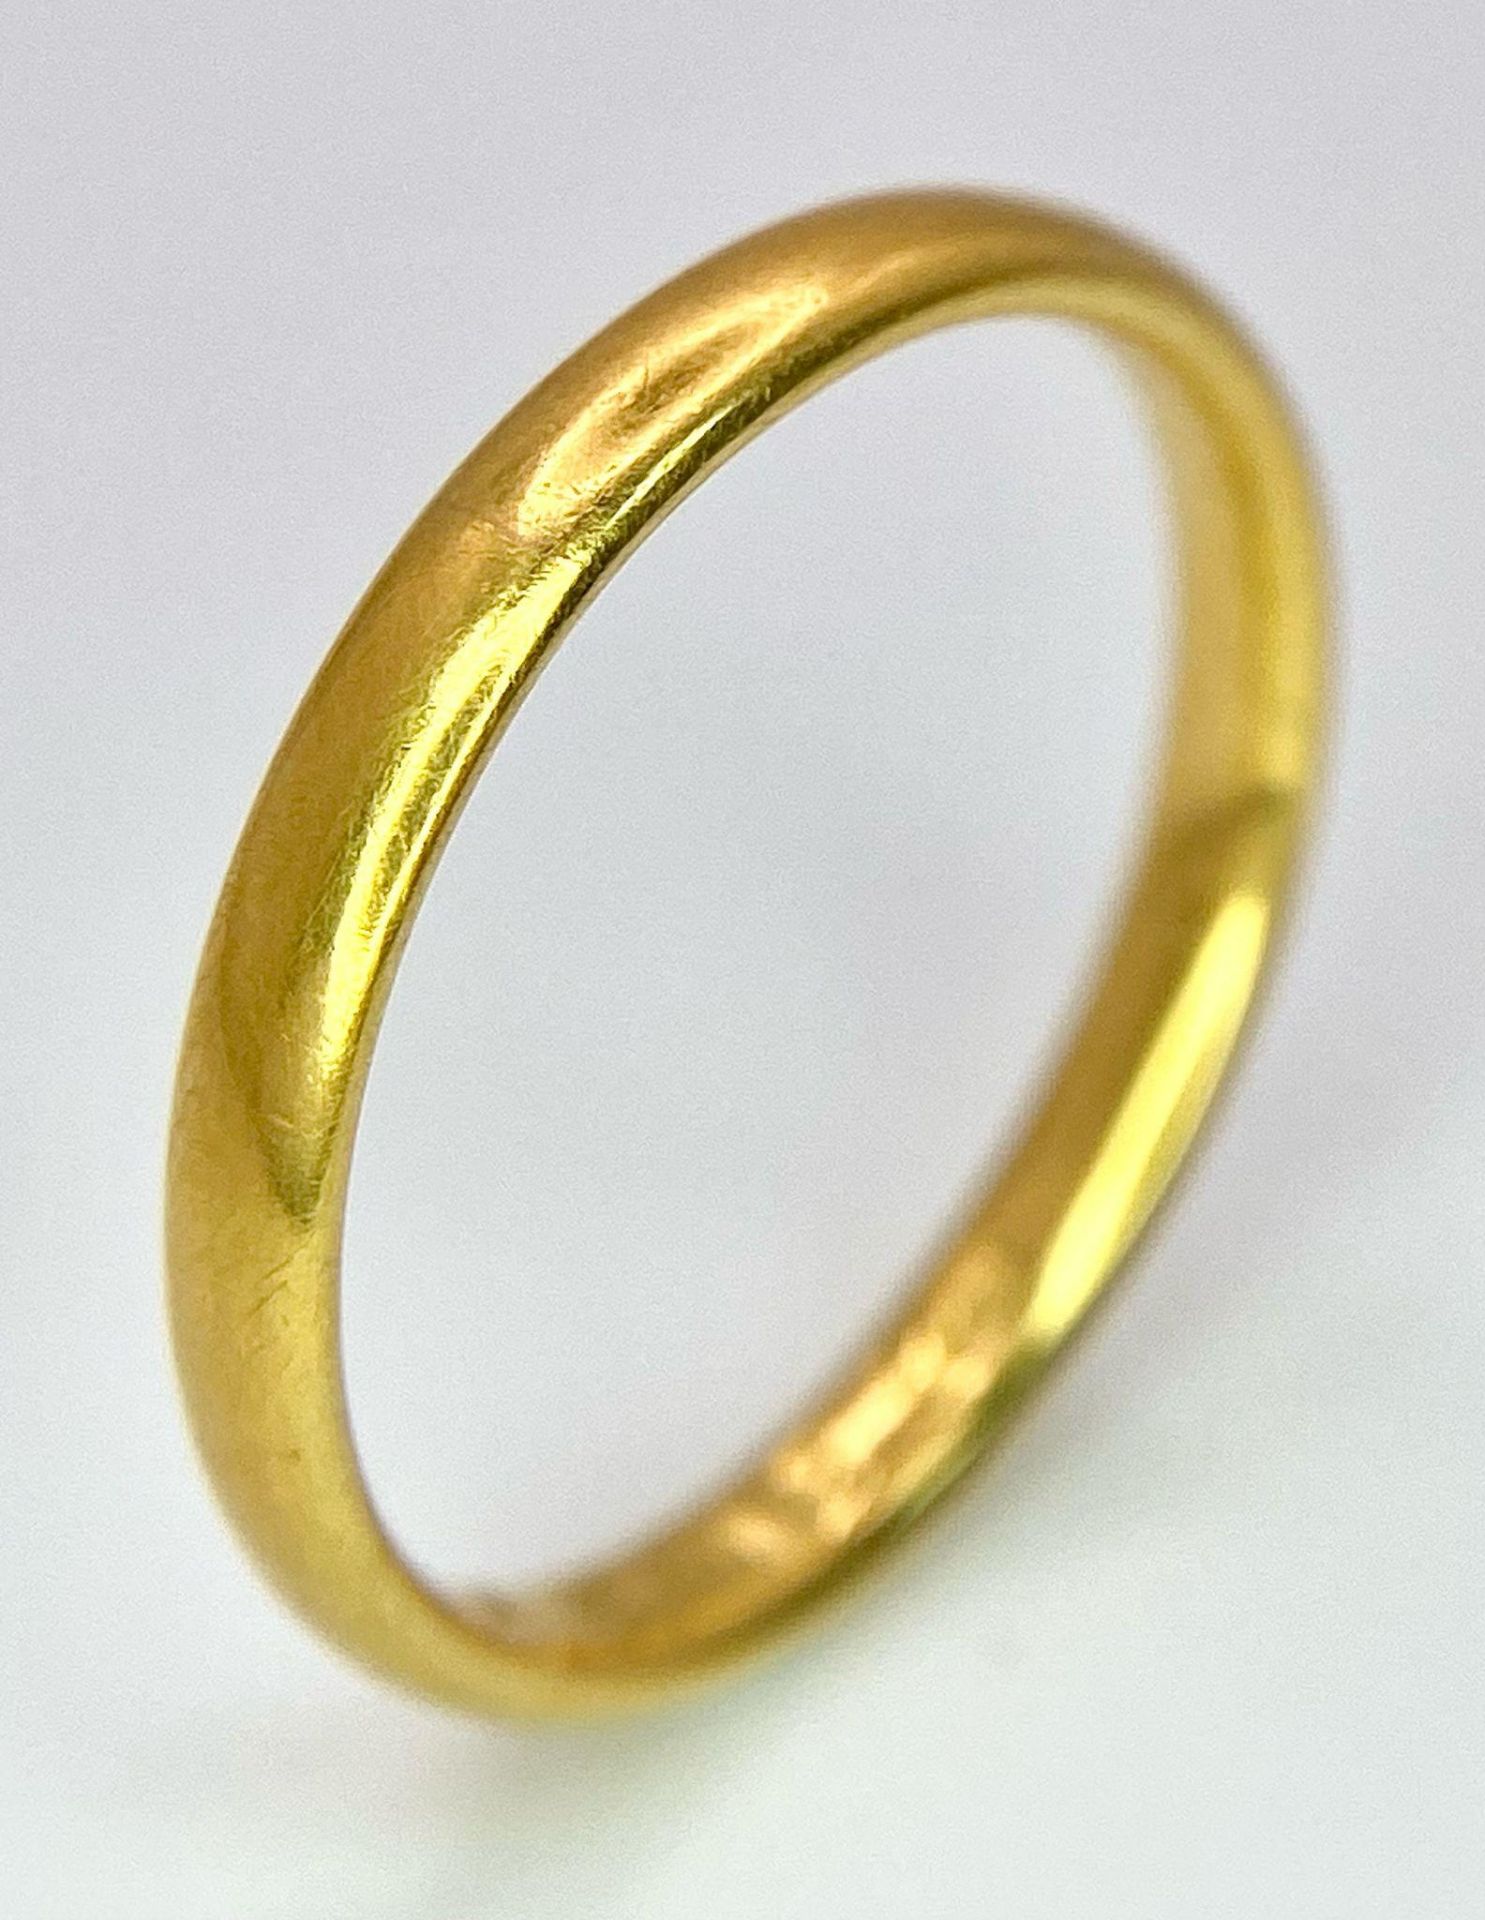 A Vintage 22k Yellow Gold Band Ring. 3mm width. Size L. 2.85g weight. Full UK hallmarks.